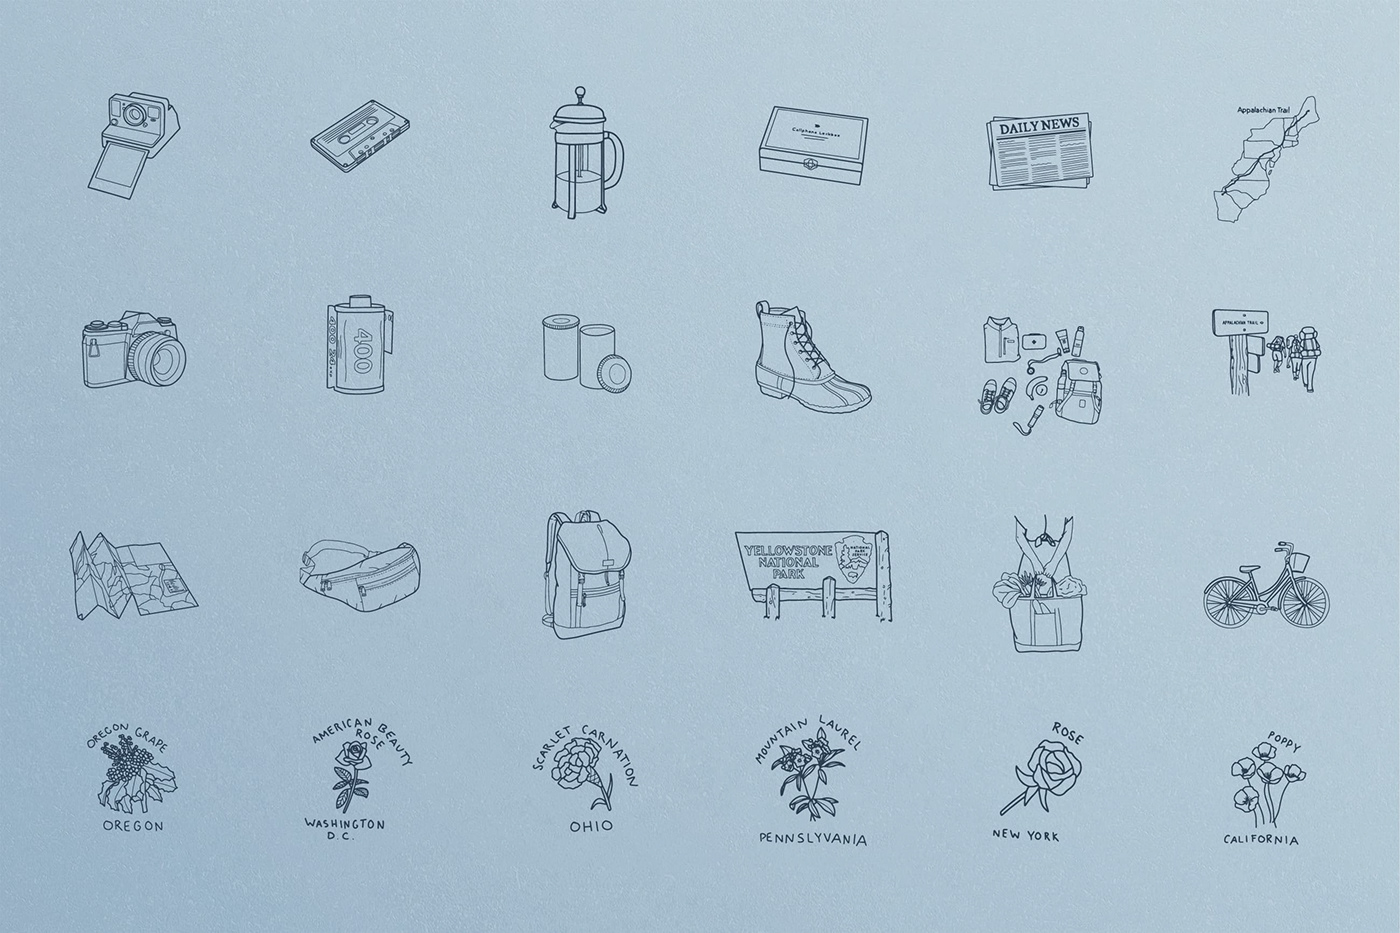 A layout/grid of adventure-related illustrations that are featured in the Getting Away book.